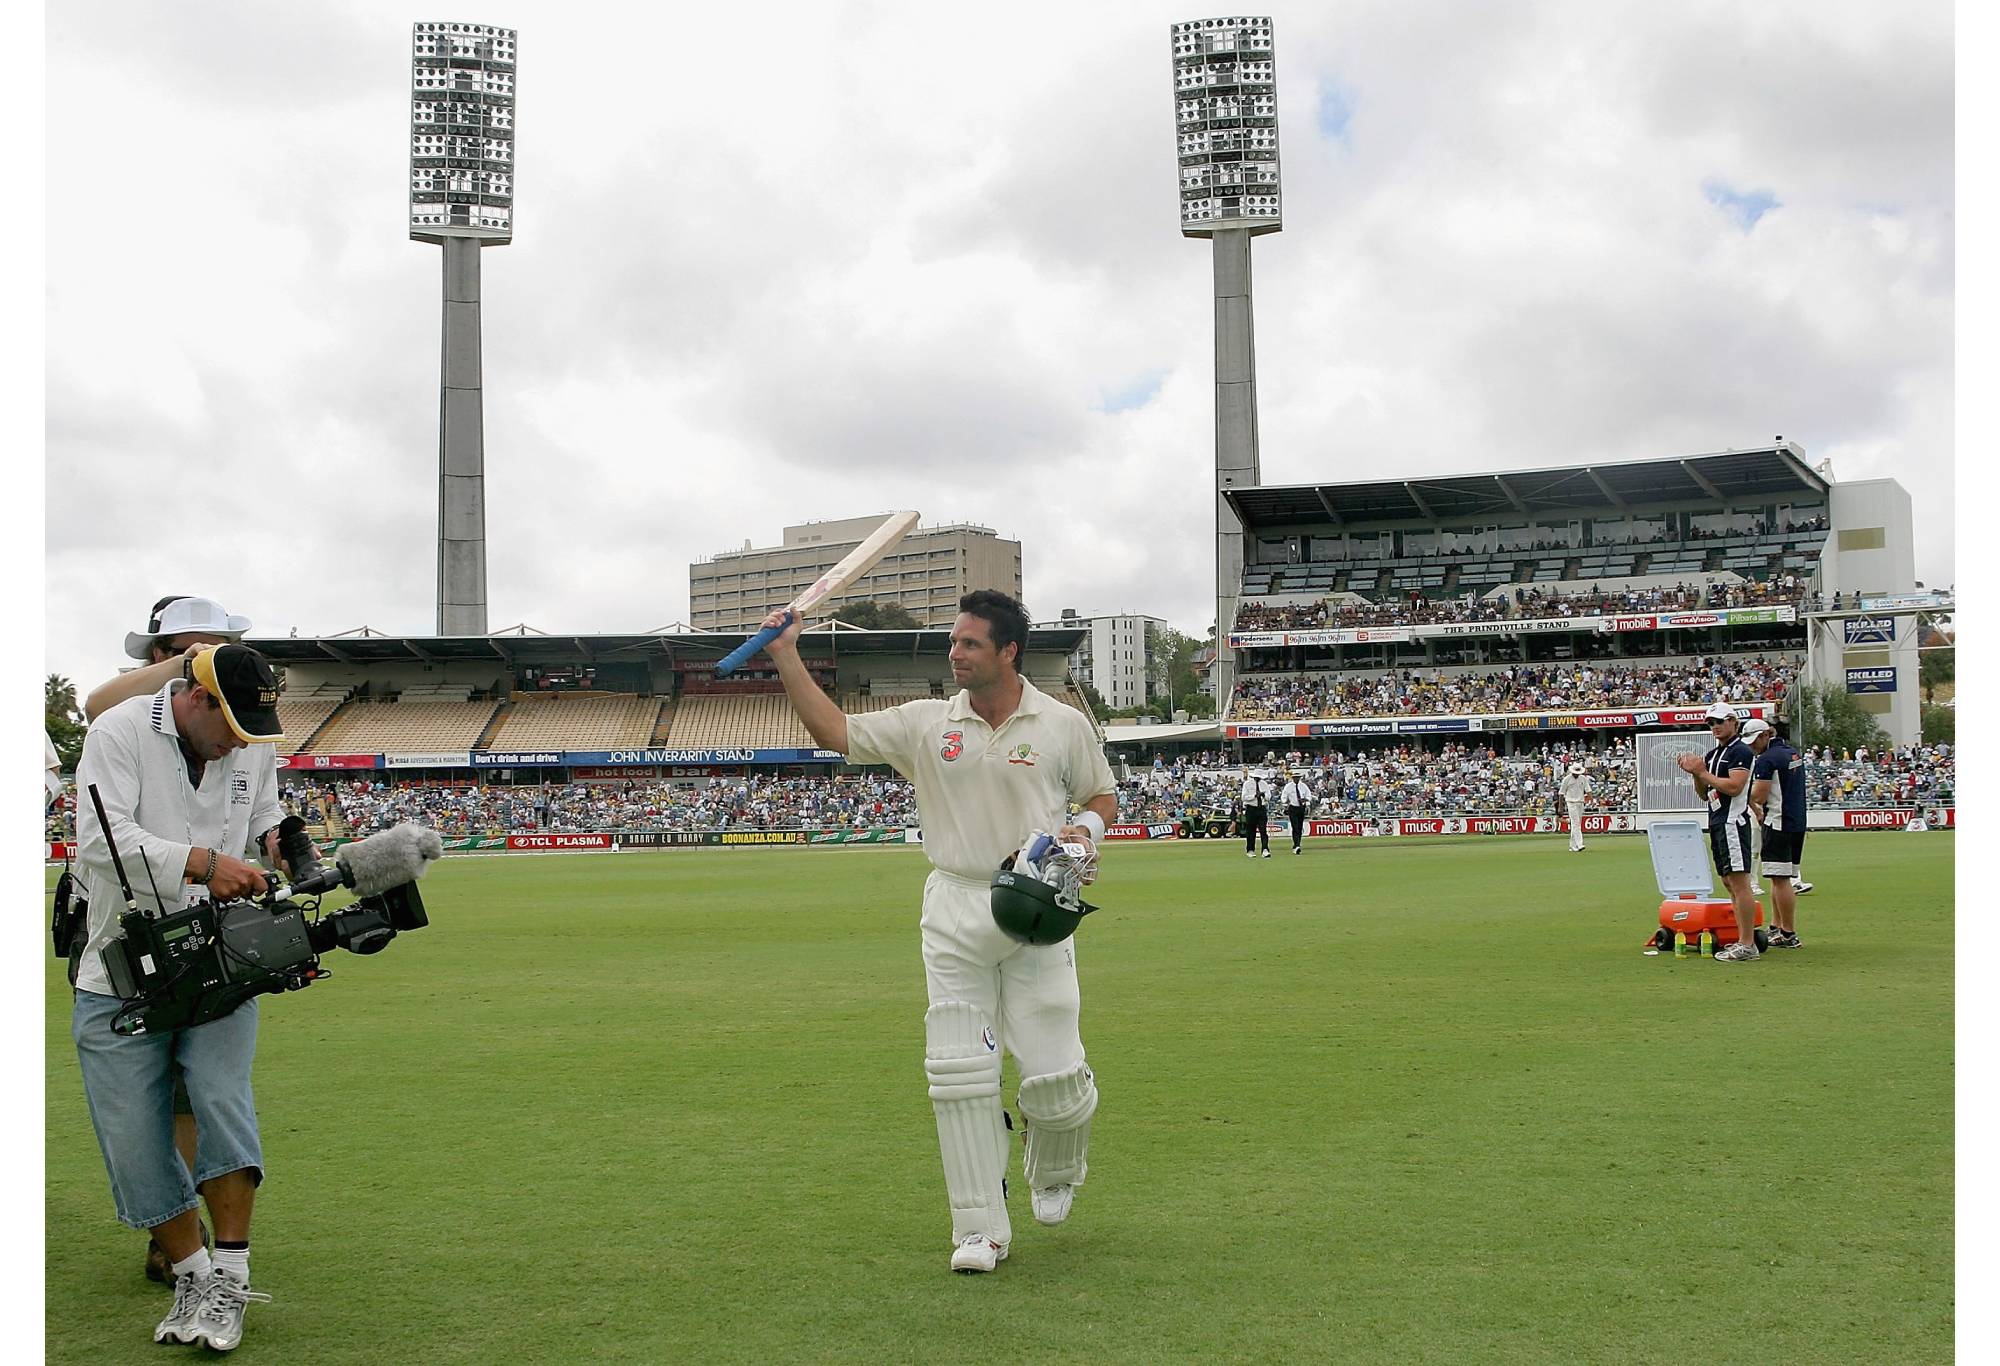 Brad Hodge acknowledges the crowd as he leaves the field 203 not out in Perth in 2005.  (Photo by Hamish Blair/Getty Images)